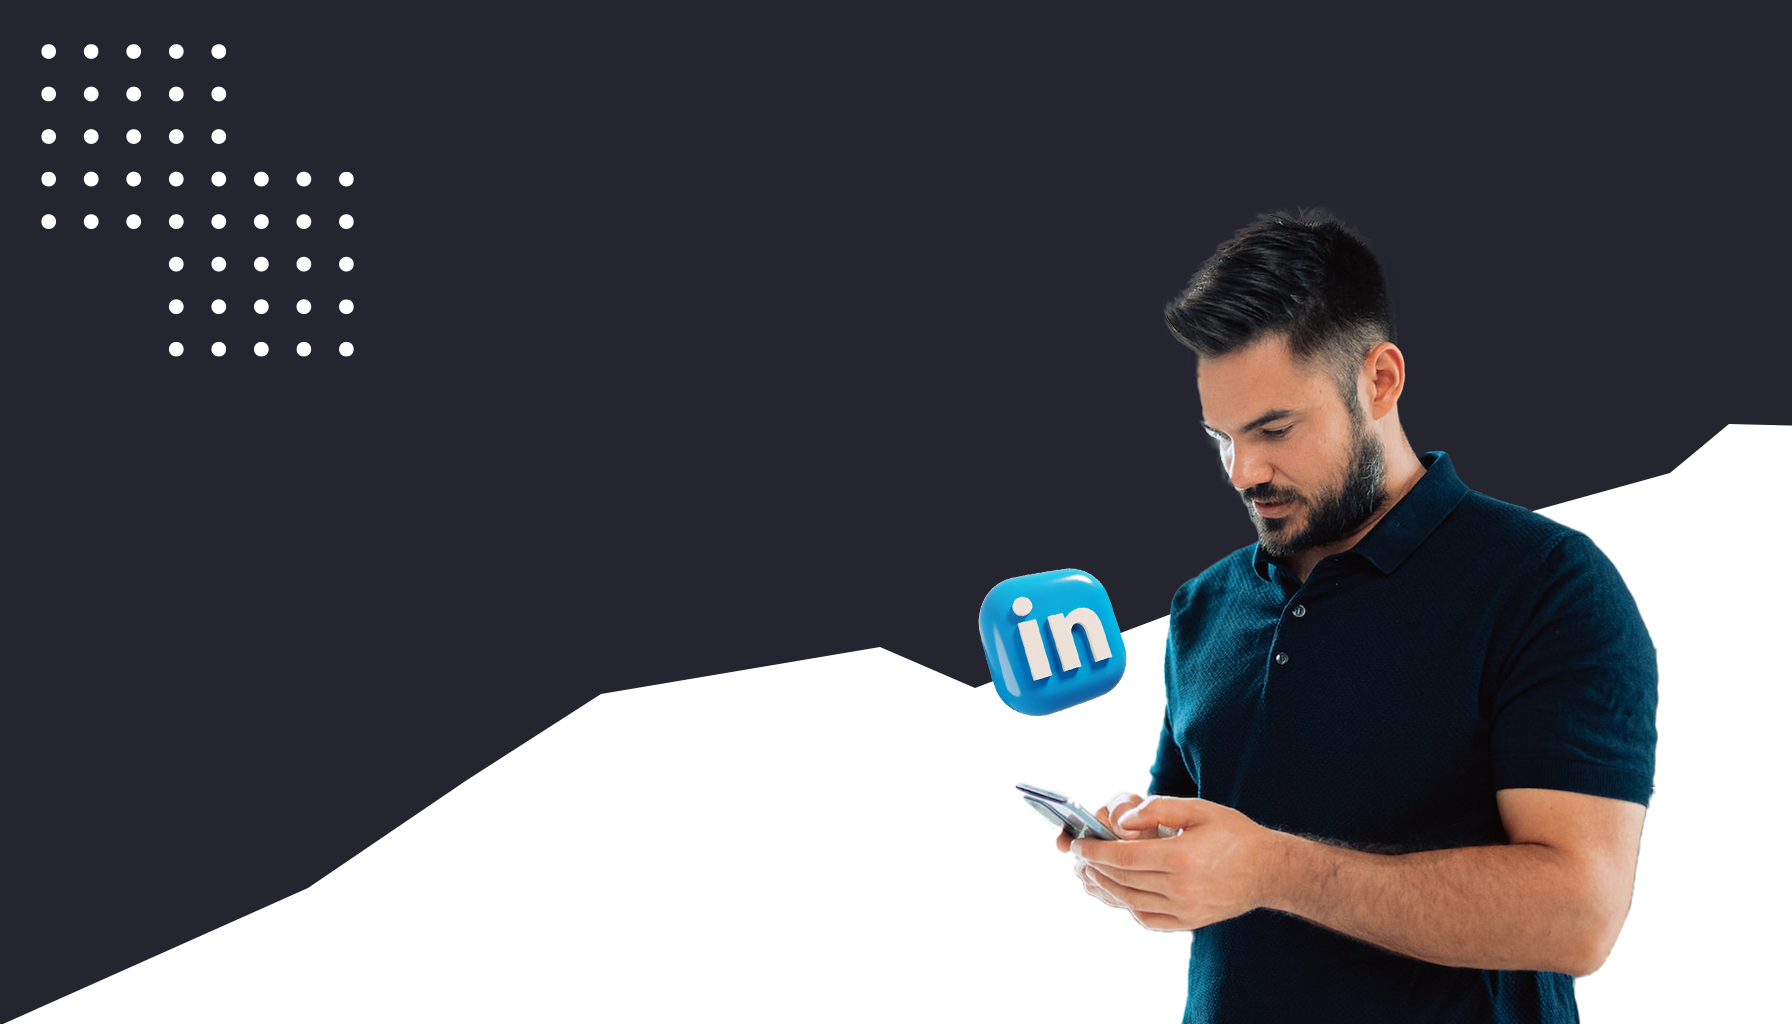 Top 10 Best LinkedIn Influencers about AI Marketing to Follow